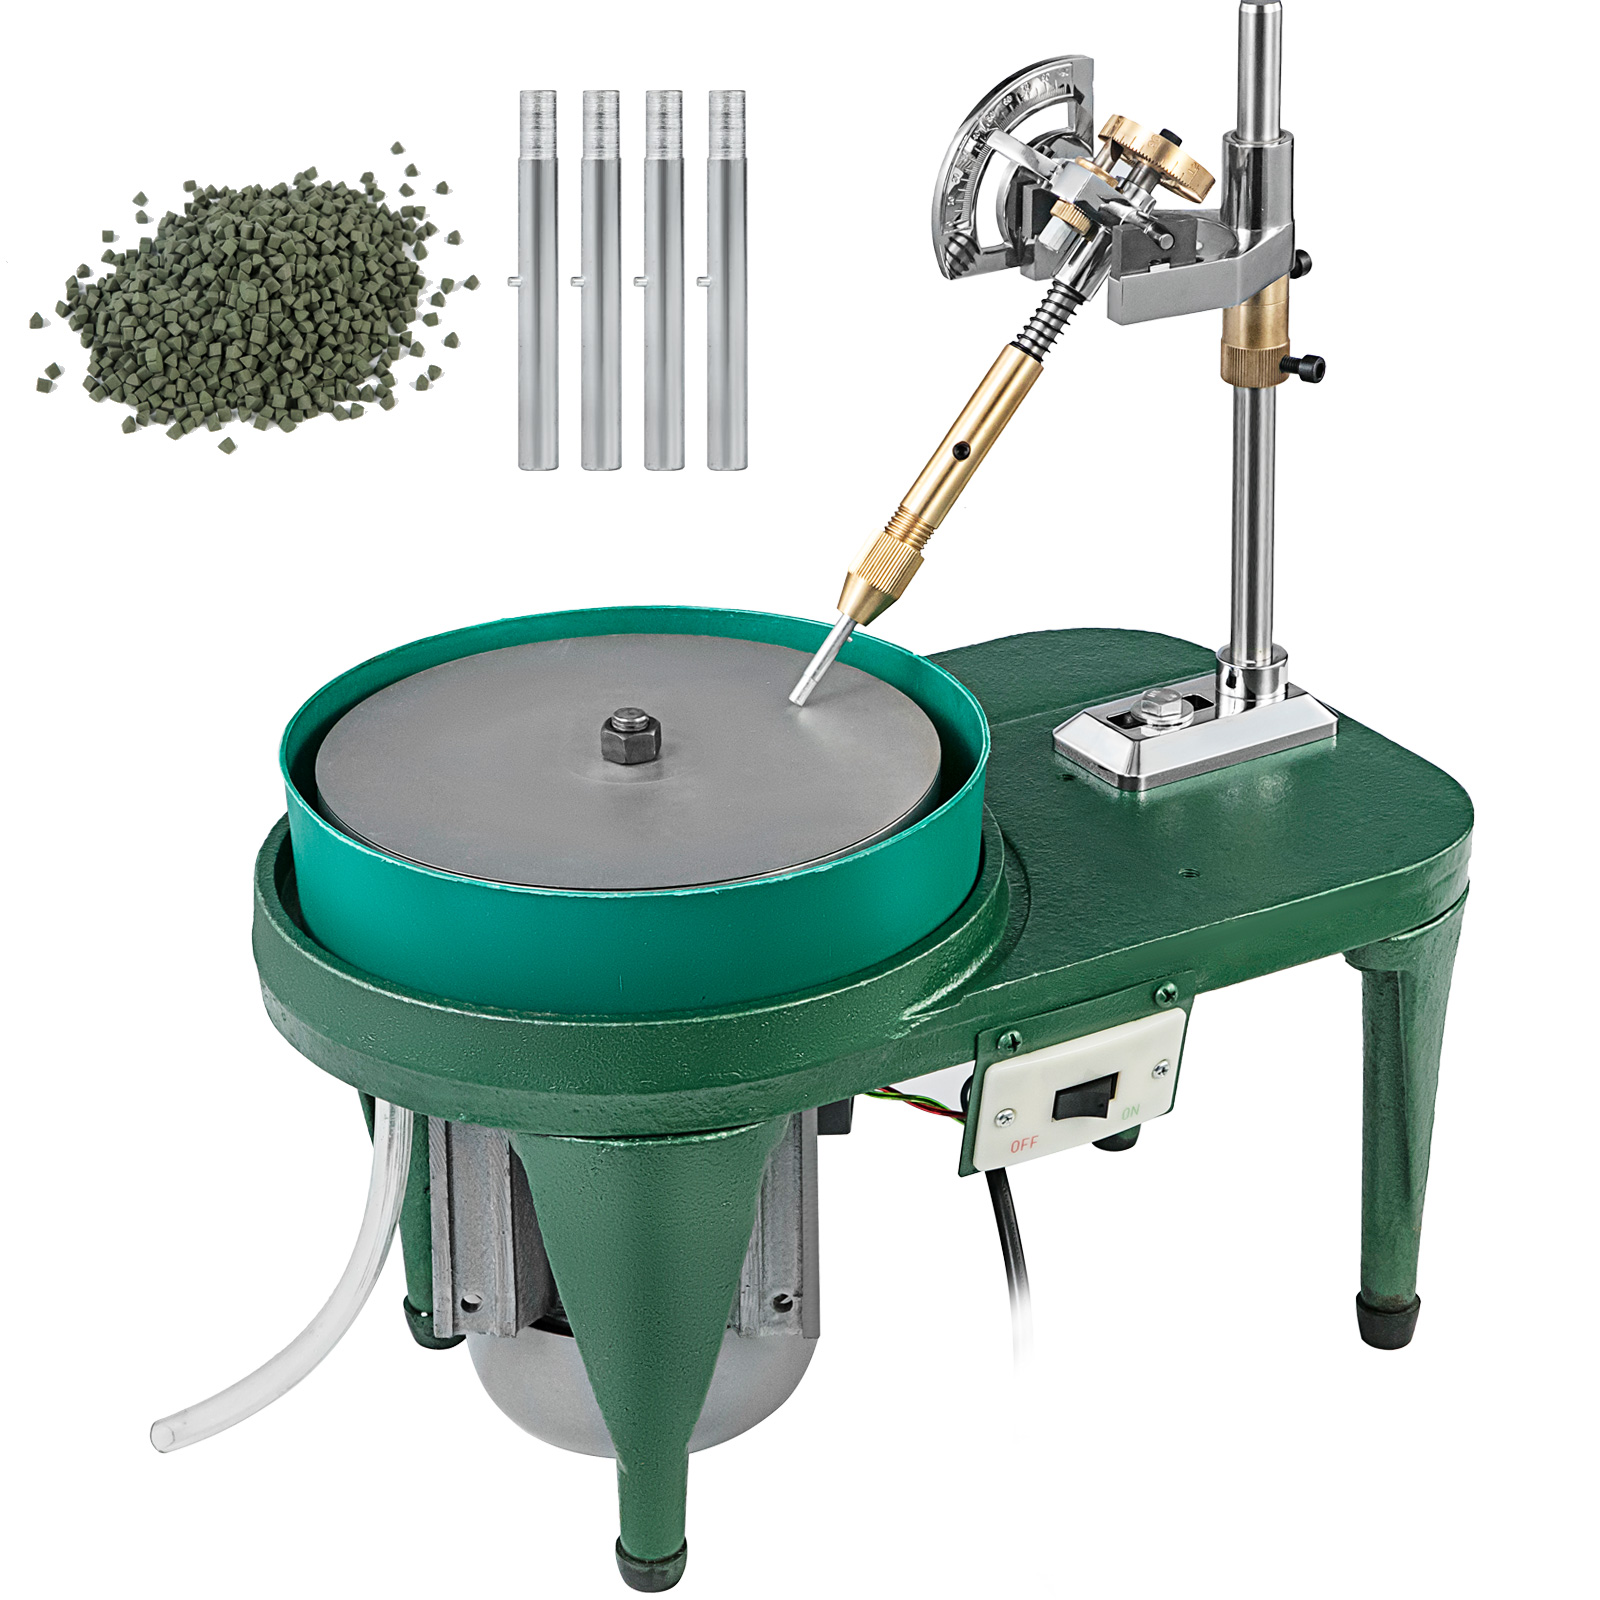 VEVOR Gem Faceting Machine 180W Jade Grinding Polishing Machine 2800RPM  Rock Polisher Jewel Angle Polisher 110V with Faceted Manipulator and Bag  of Triangle Abrasive for Jewelry Polisher